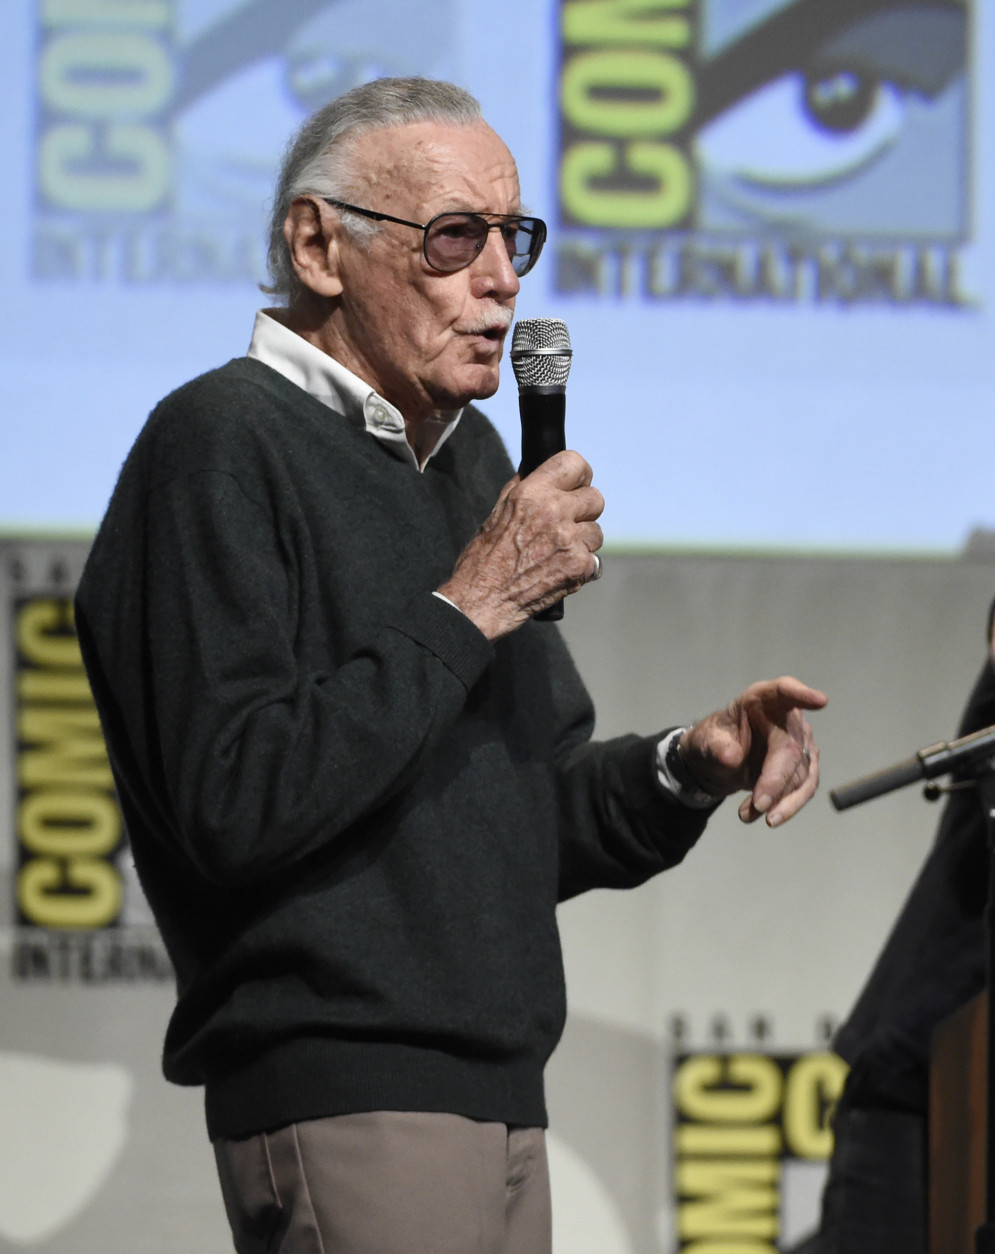 Stan Lee attends the "X-Men: Apocalypse" panel on day 3 of Comic-Con International on Saturday, July 11, 2015, in San Diego, Calif. (Photo by Chris Pizzello/Invision/AP)